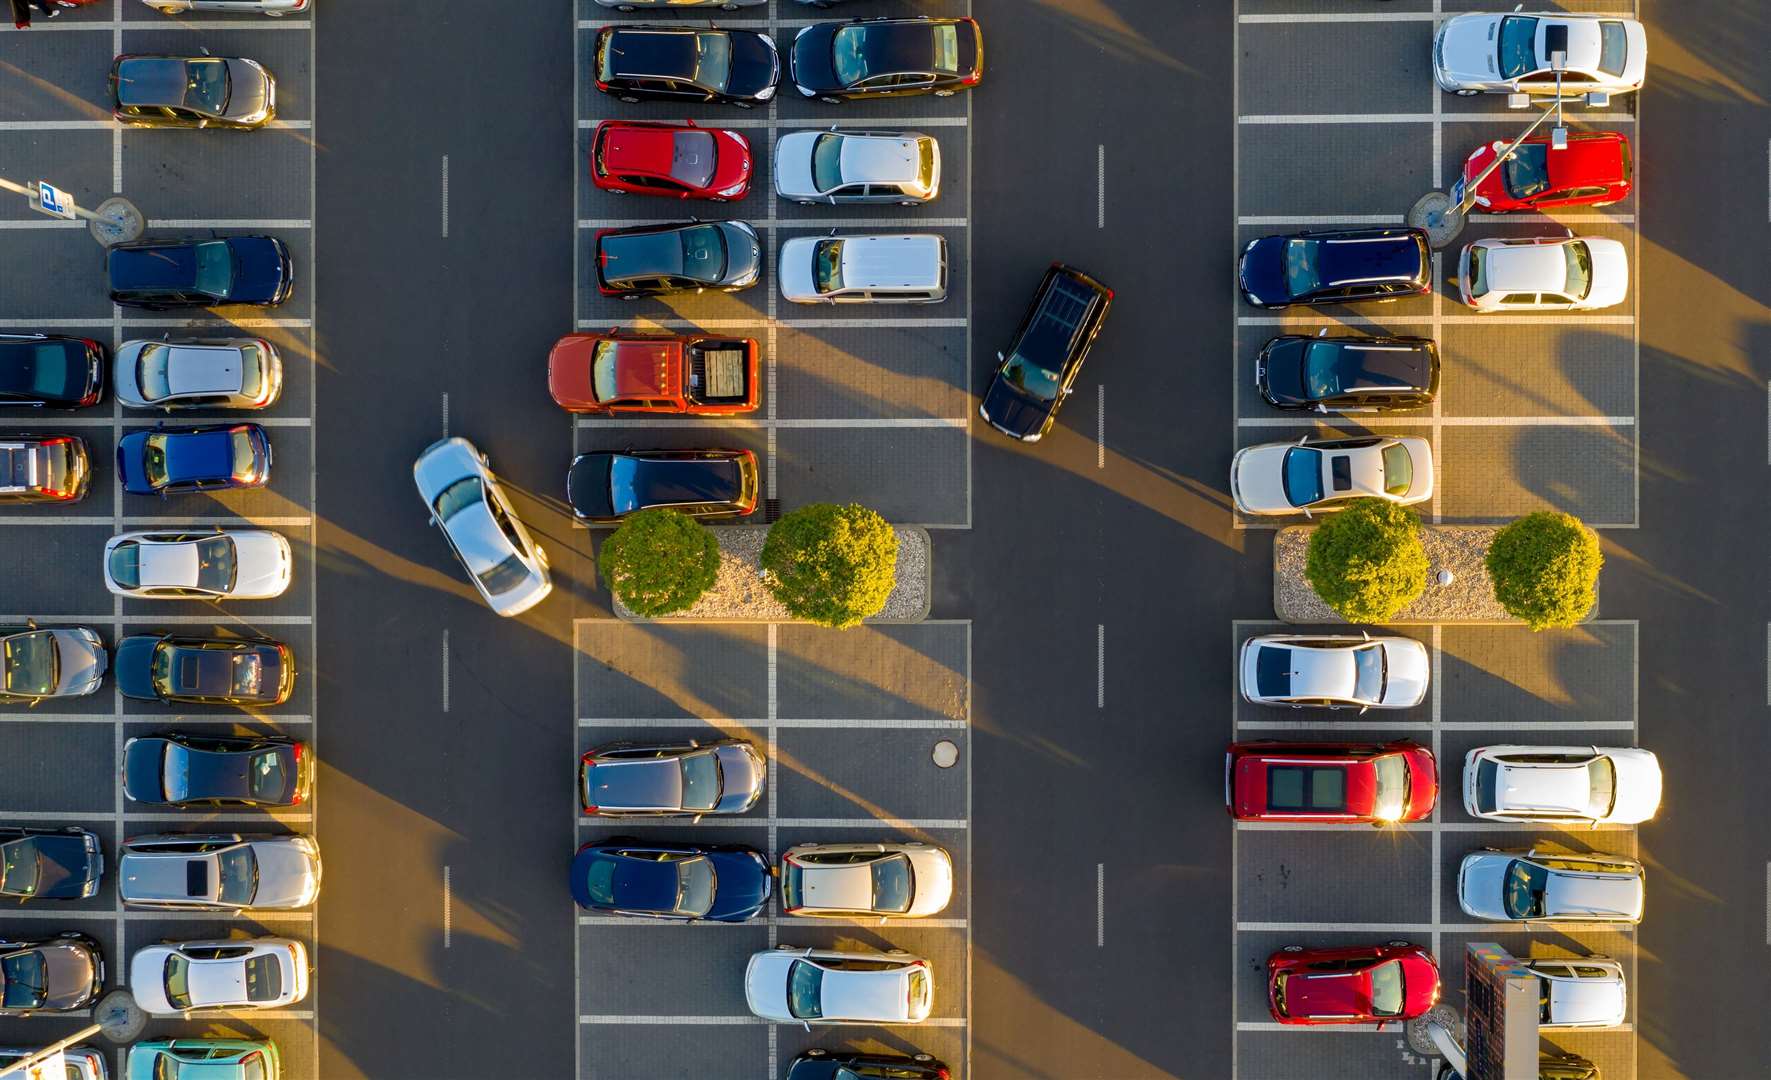 Churchill says drivers are damaging their vehicles trying to squeeze in spaces. Image: iStock.